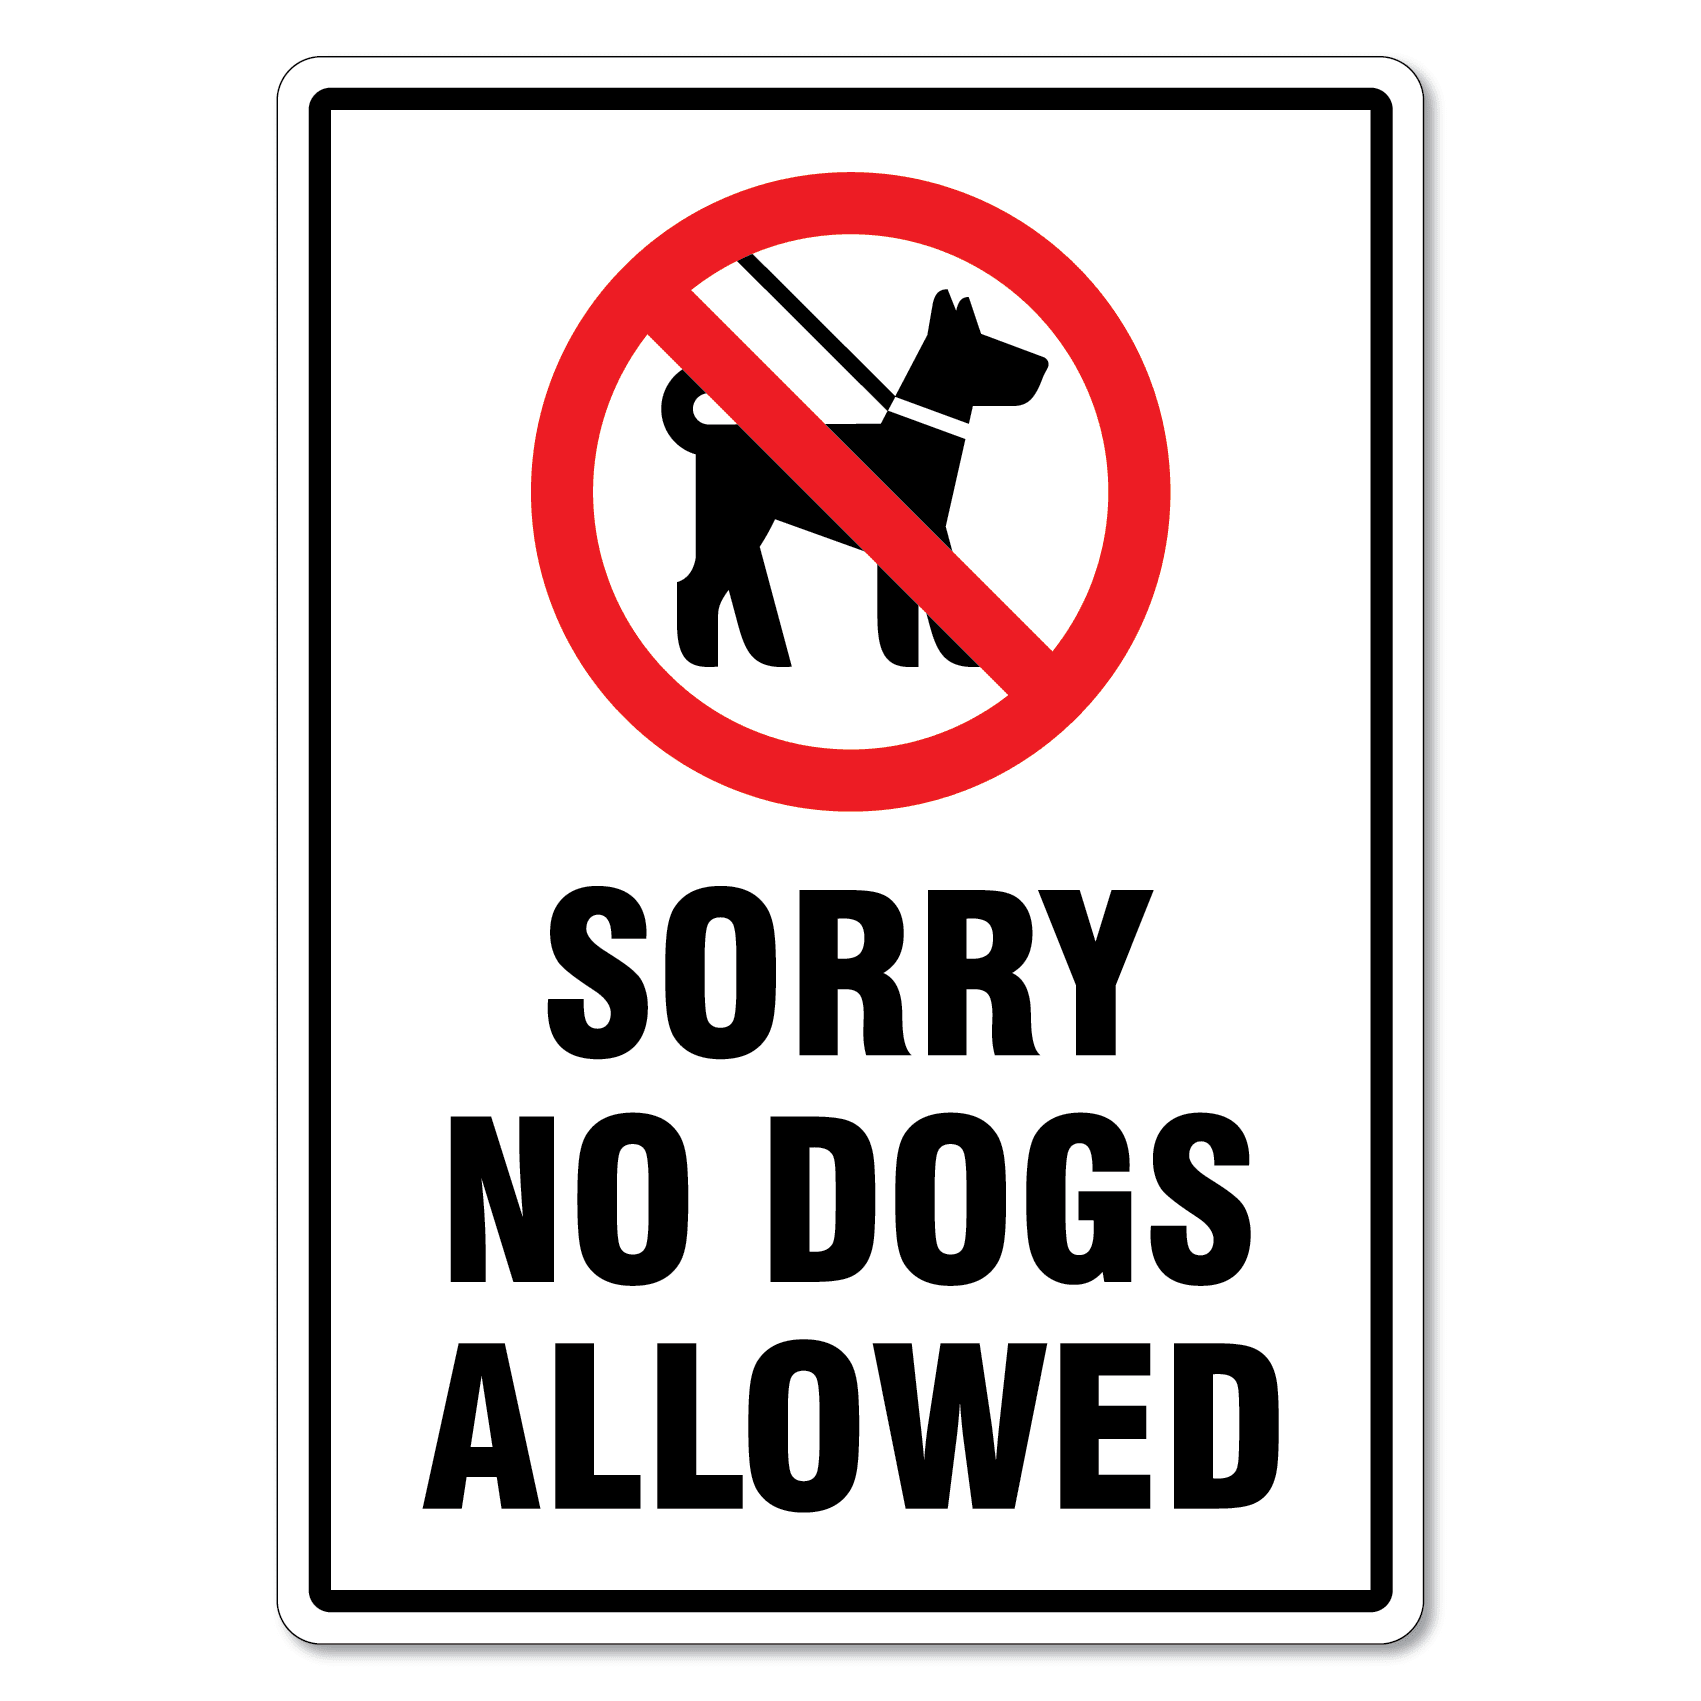 Previews allowed. No Dogs allowed. No Dogs allowed sign. Ноу сори. Pets are not allowed.